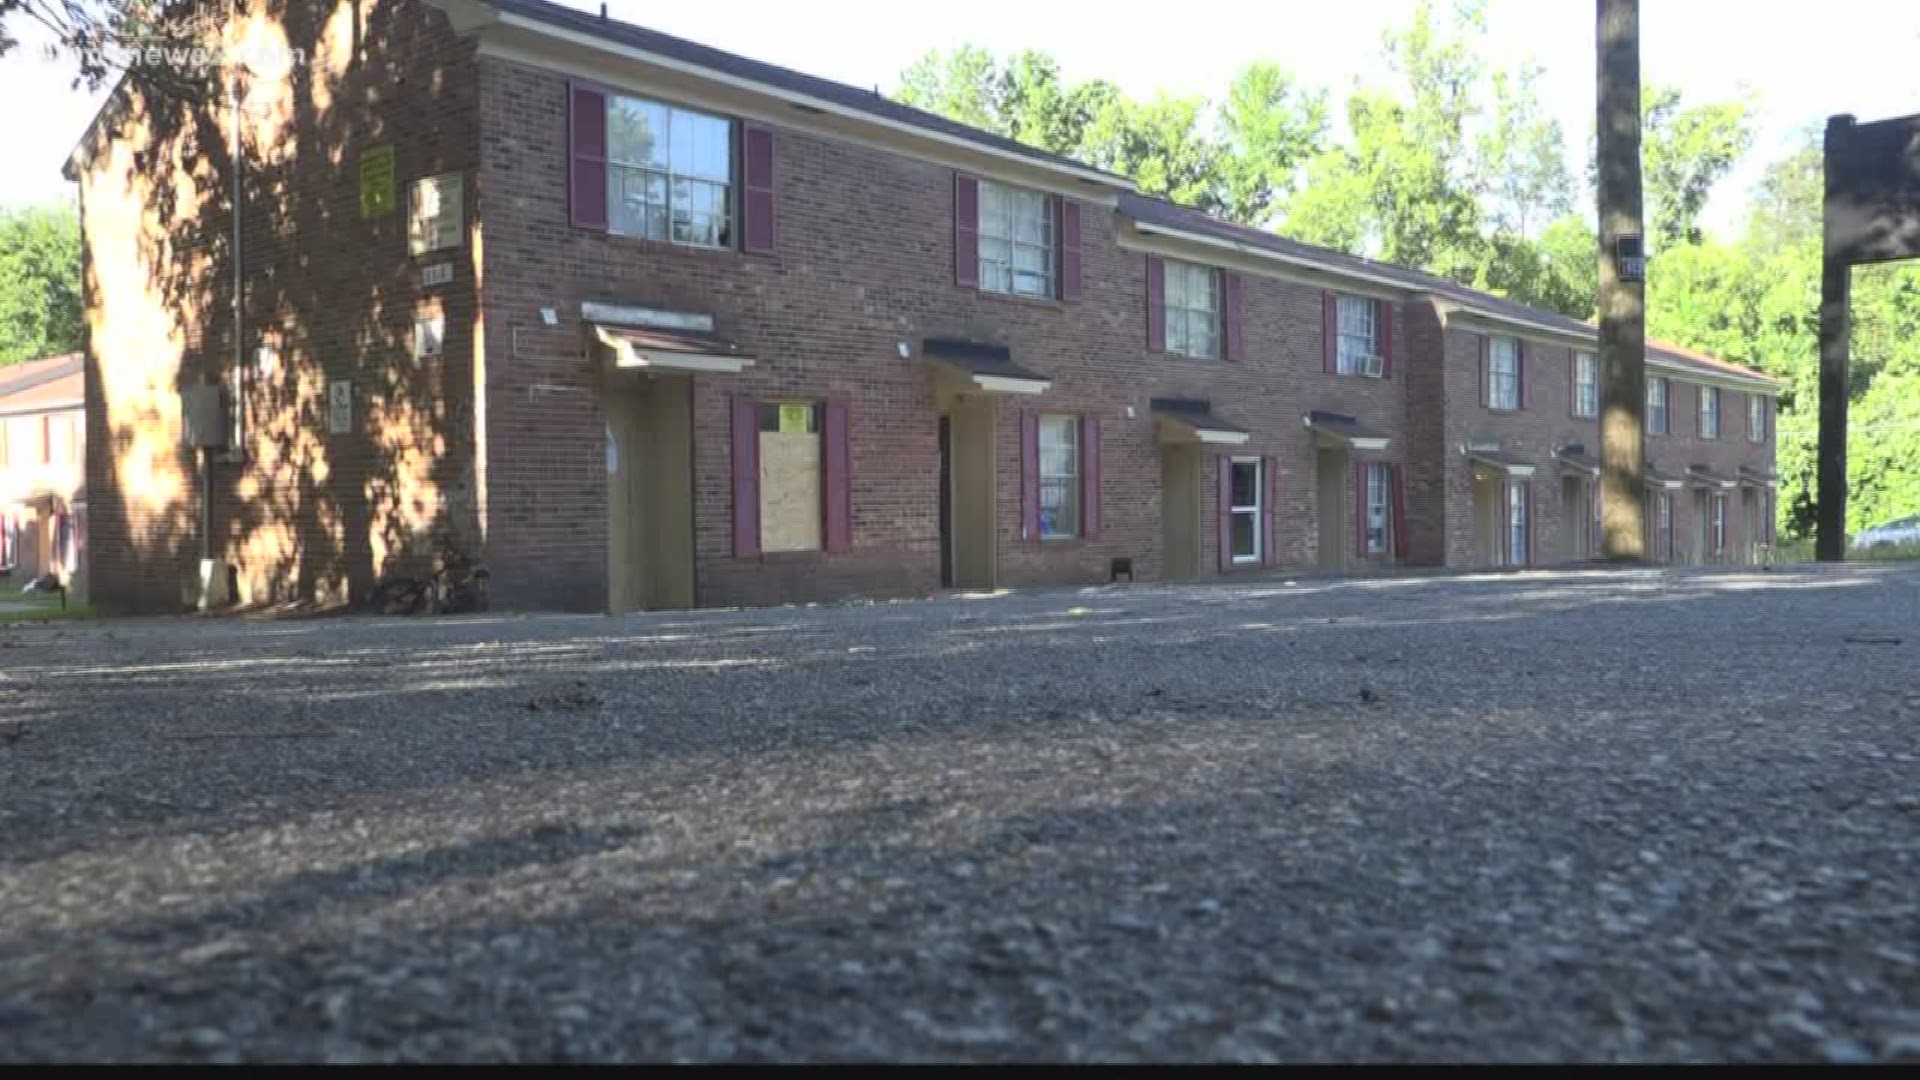 The city learned of these problems last week after a power outage at the apartment complex.